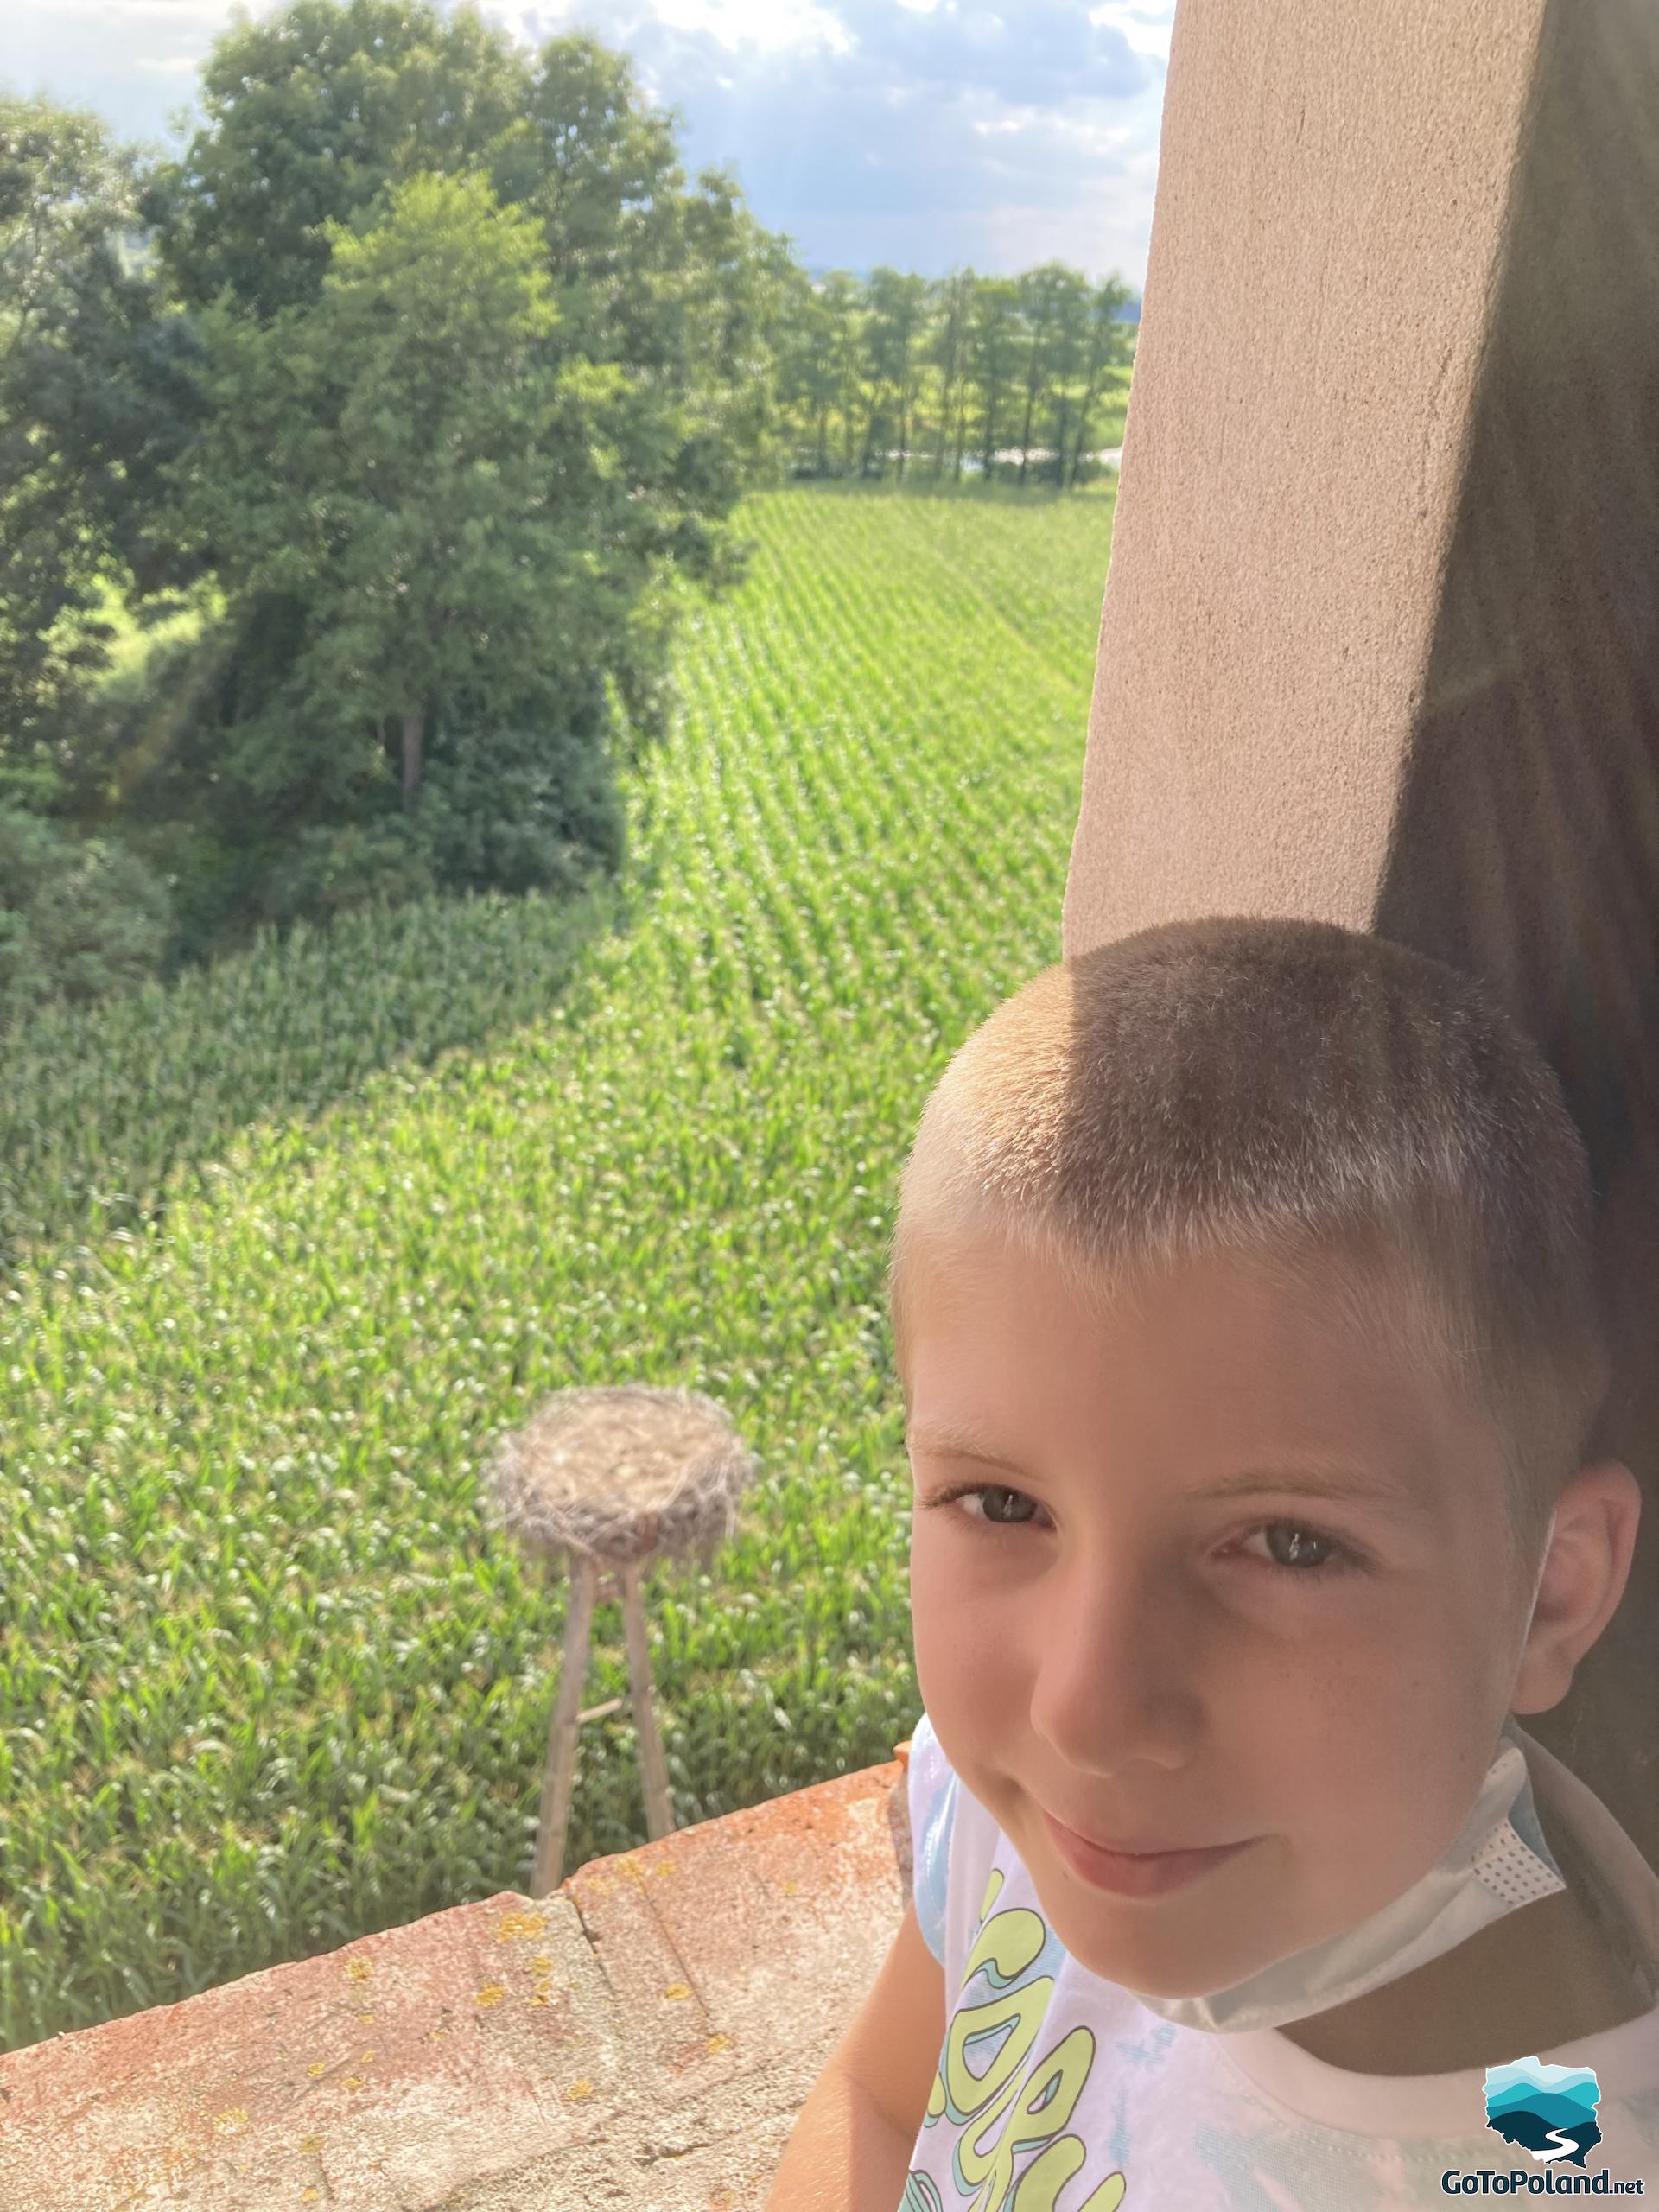 the boy is standing by the castle window, in the background a meadow and a storks nest